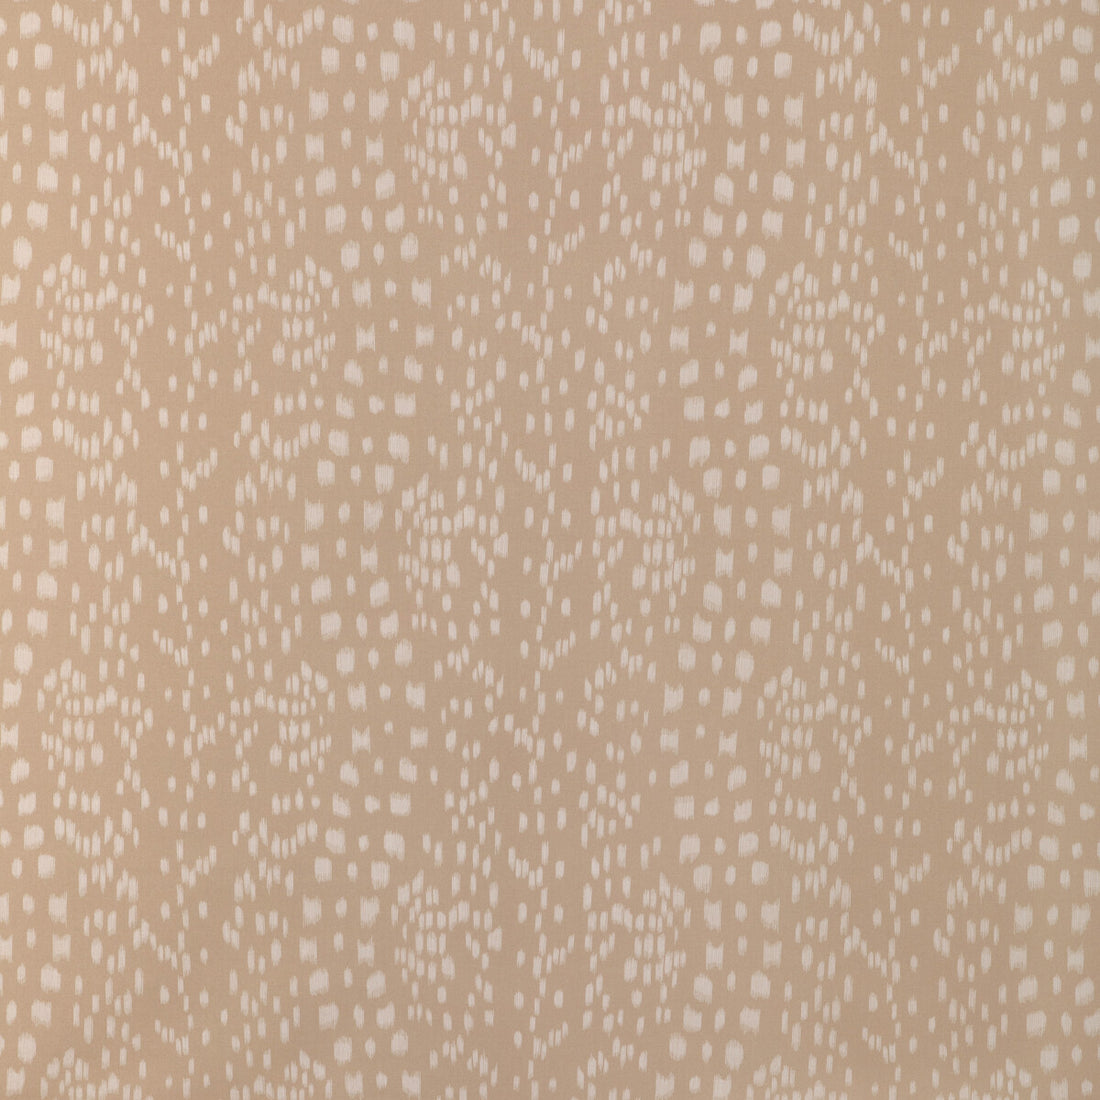 Les Touches Reverse fabric in sand color - pattern 8024103.16.0 - by Brunschwig &amp; Fils in the La Menagerie collection